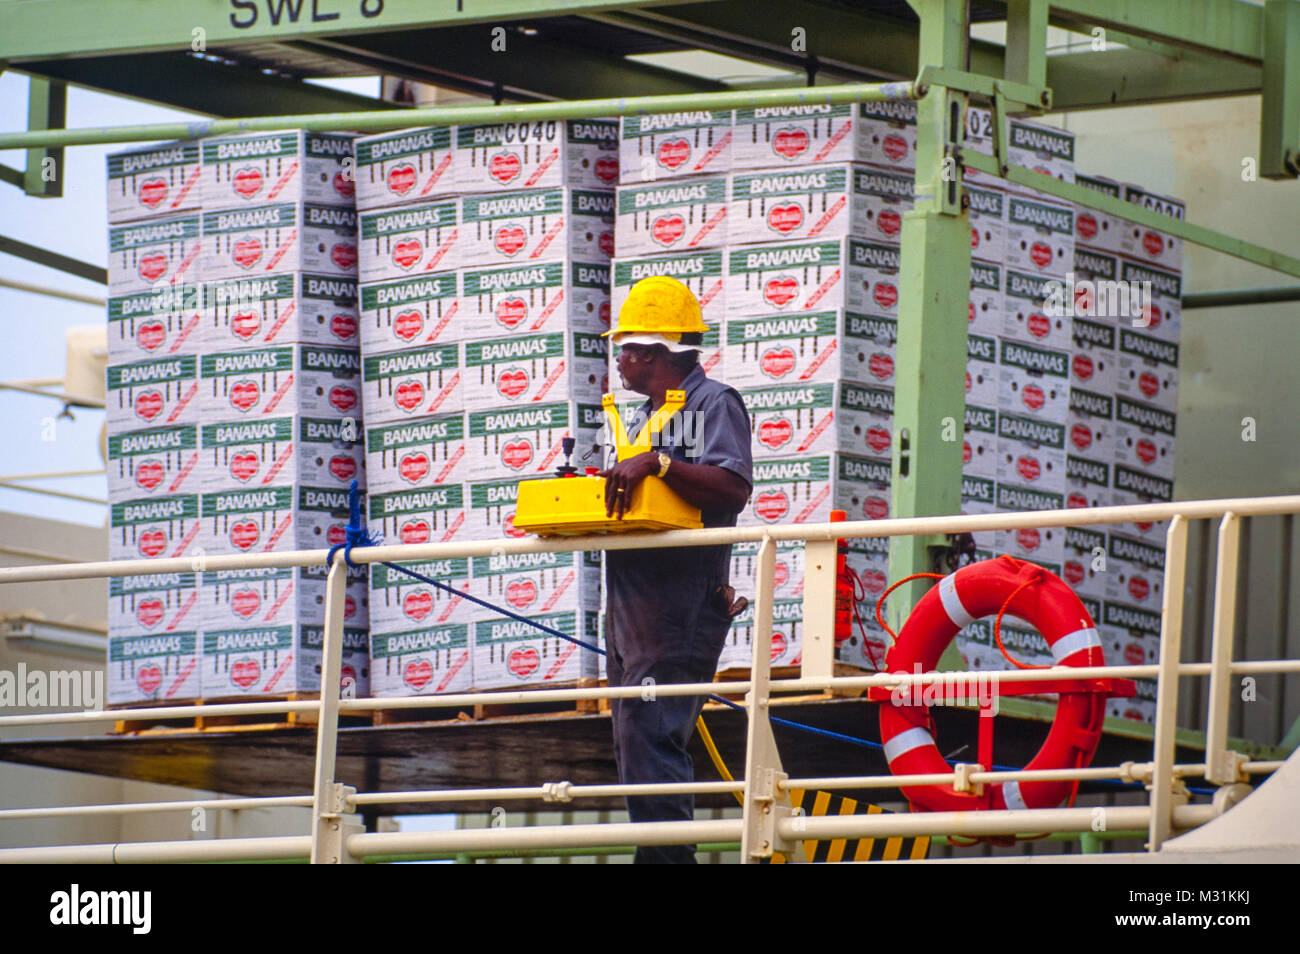 Ship cargo hold loading of fruit, bananas for export import. Stock Photo